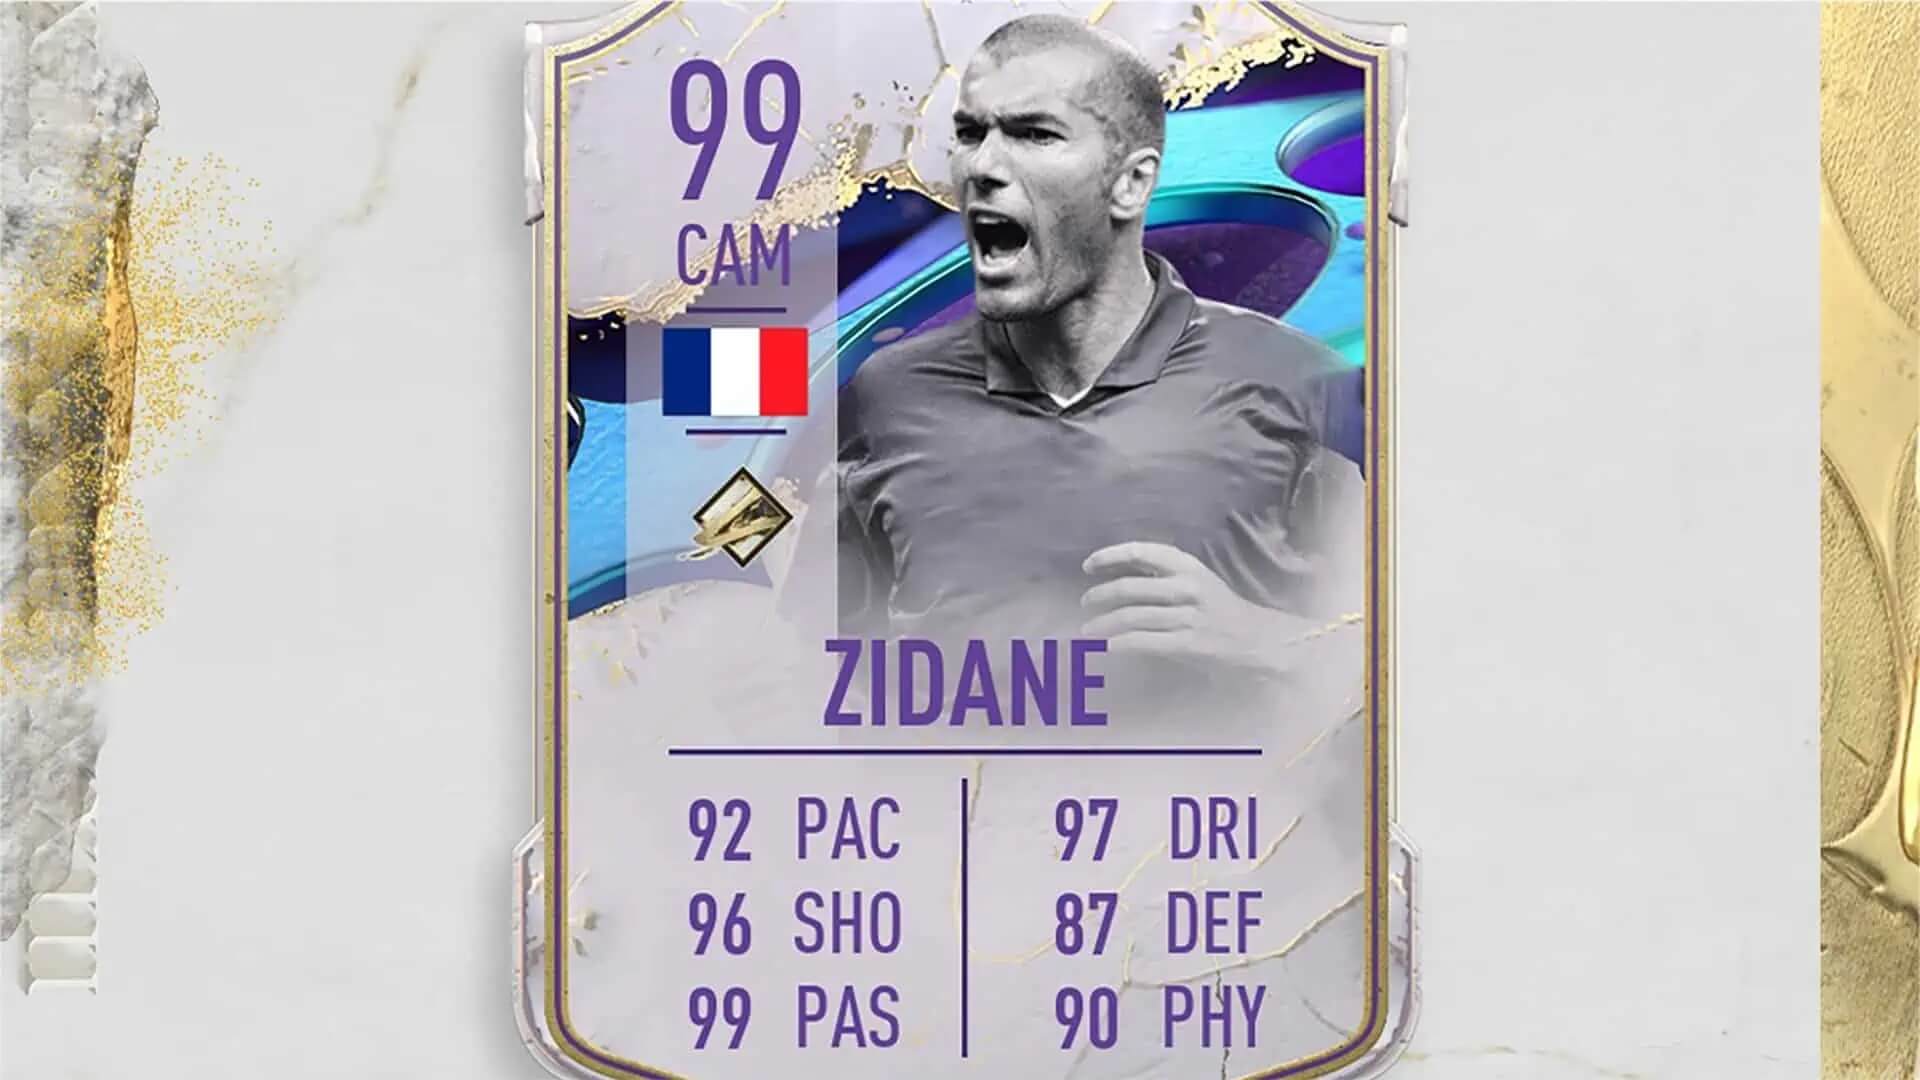 FIFA 23: How to Complete the Cover Star Icon Zinedine Zidane SBC